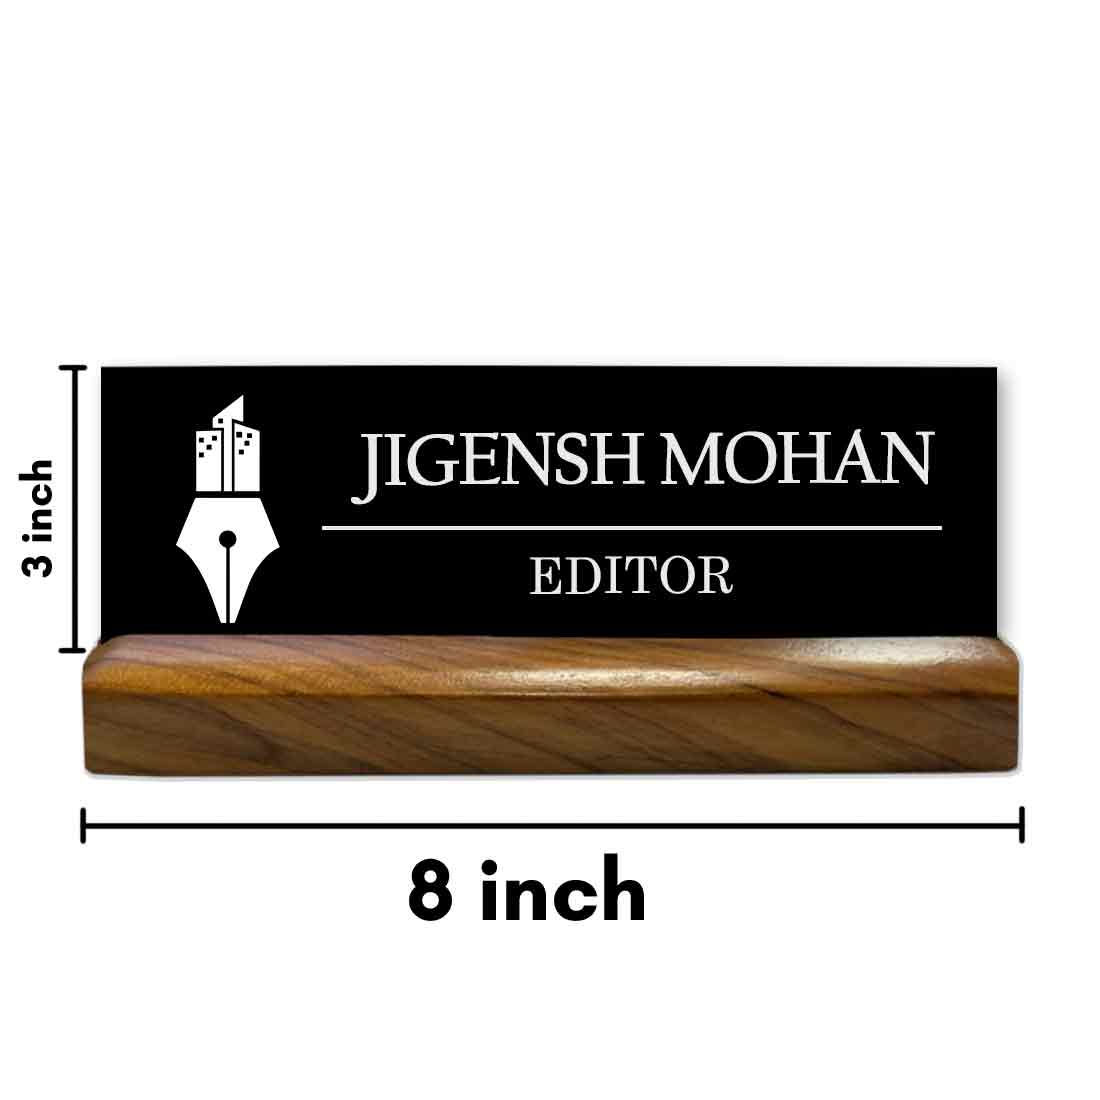 Customized Desk Name Plate Engraved Office Name Plates For Editor